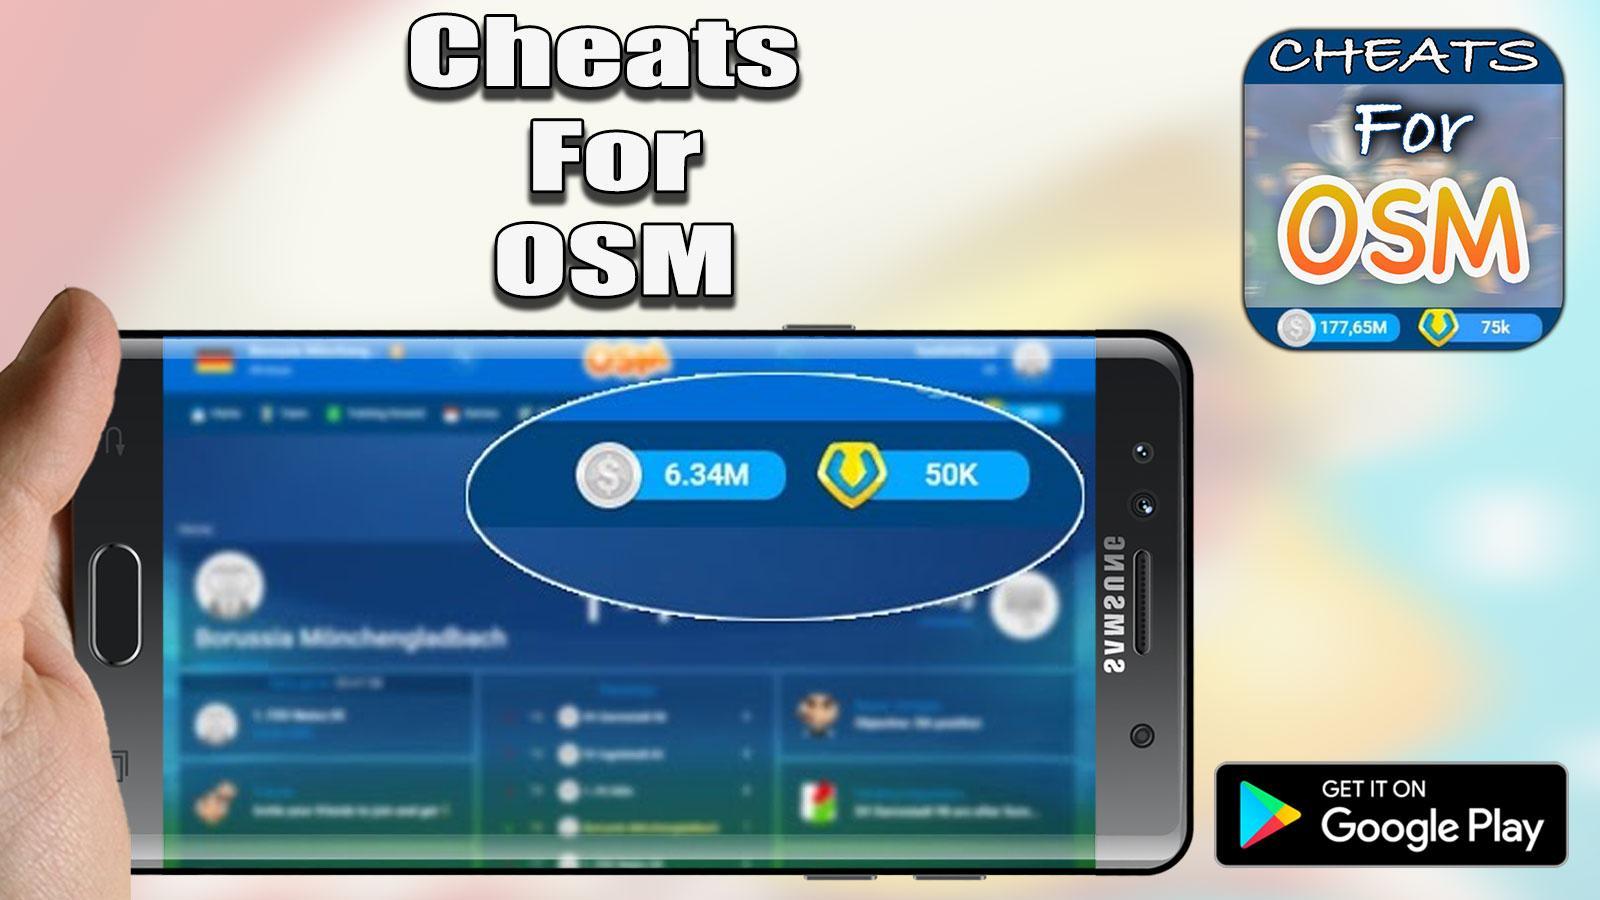 Online Soccer Manager Cheats Using Osmhack.Us Unlimited Free ... - 